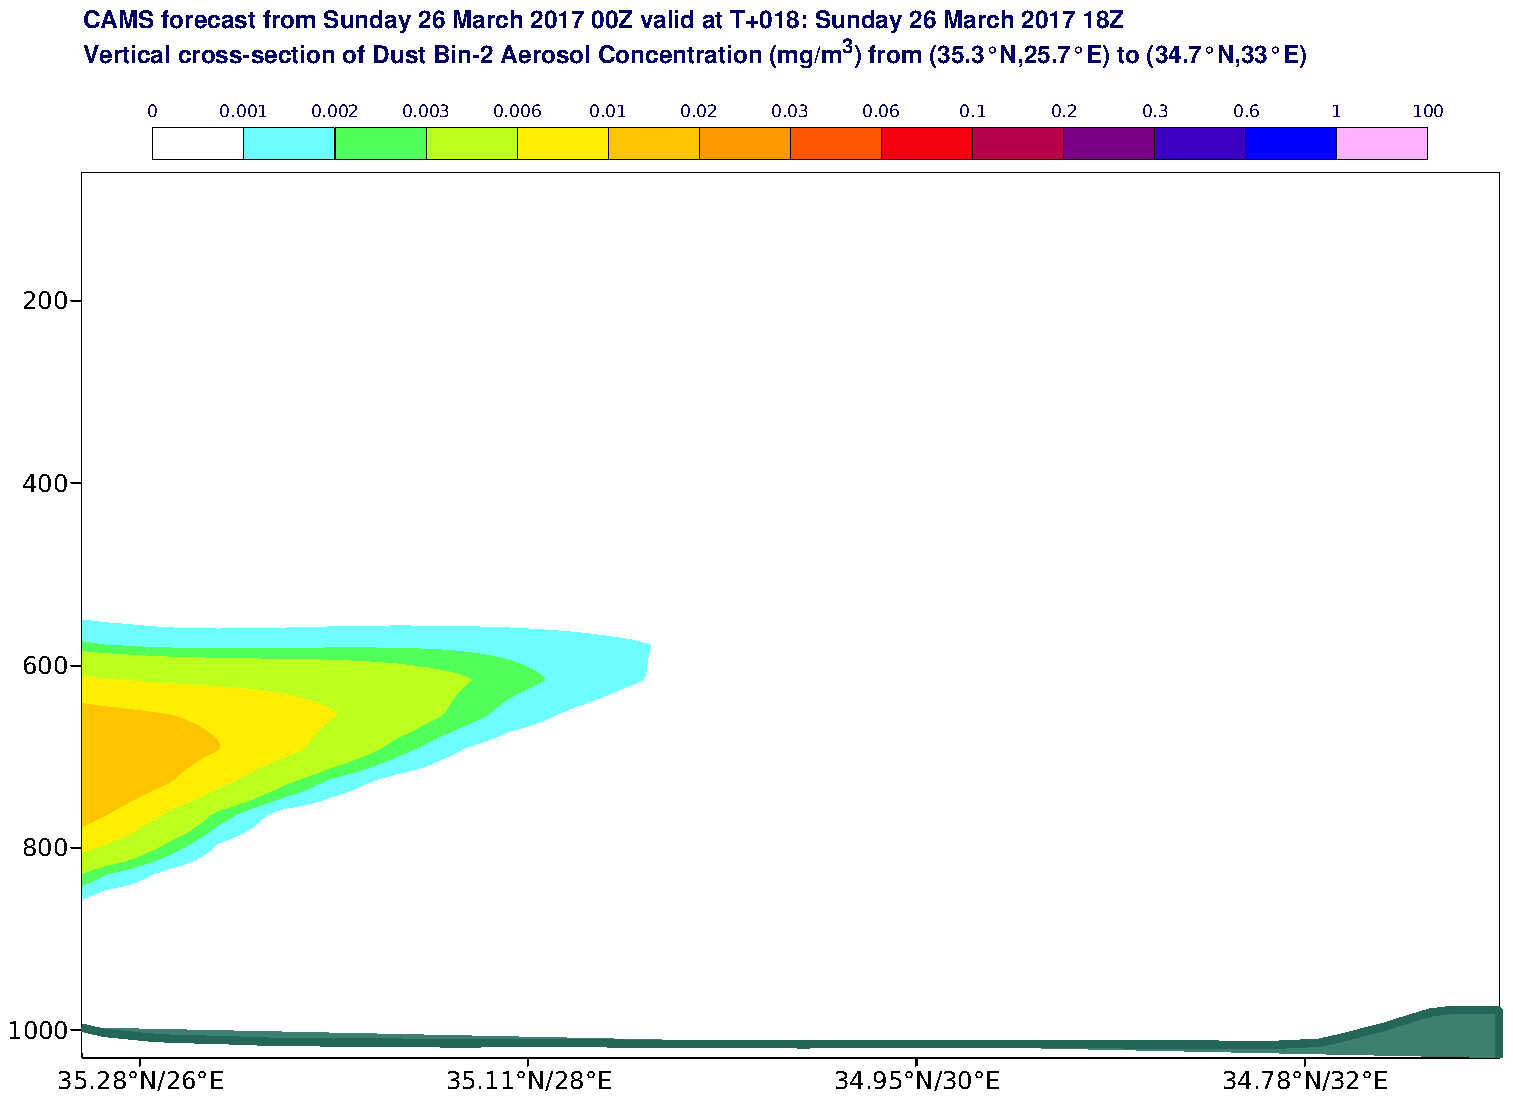 Vertical cross-section of Dust Bin-2 Aerosol Concentration (mg/m3) valid at T18 - 2017-03-26 18:00